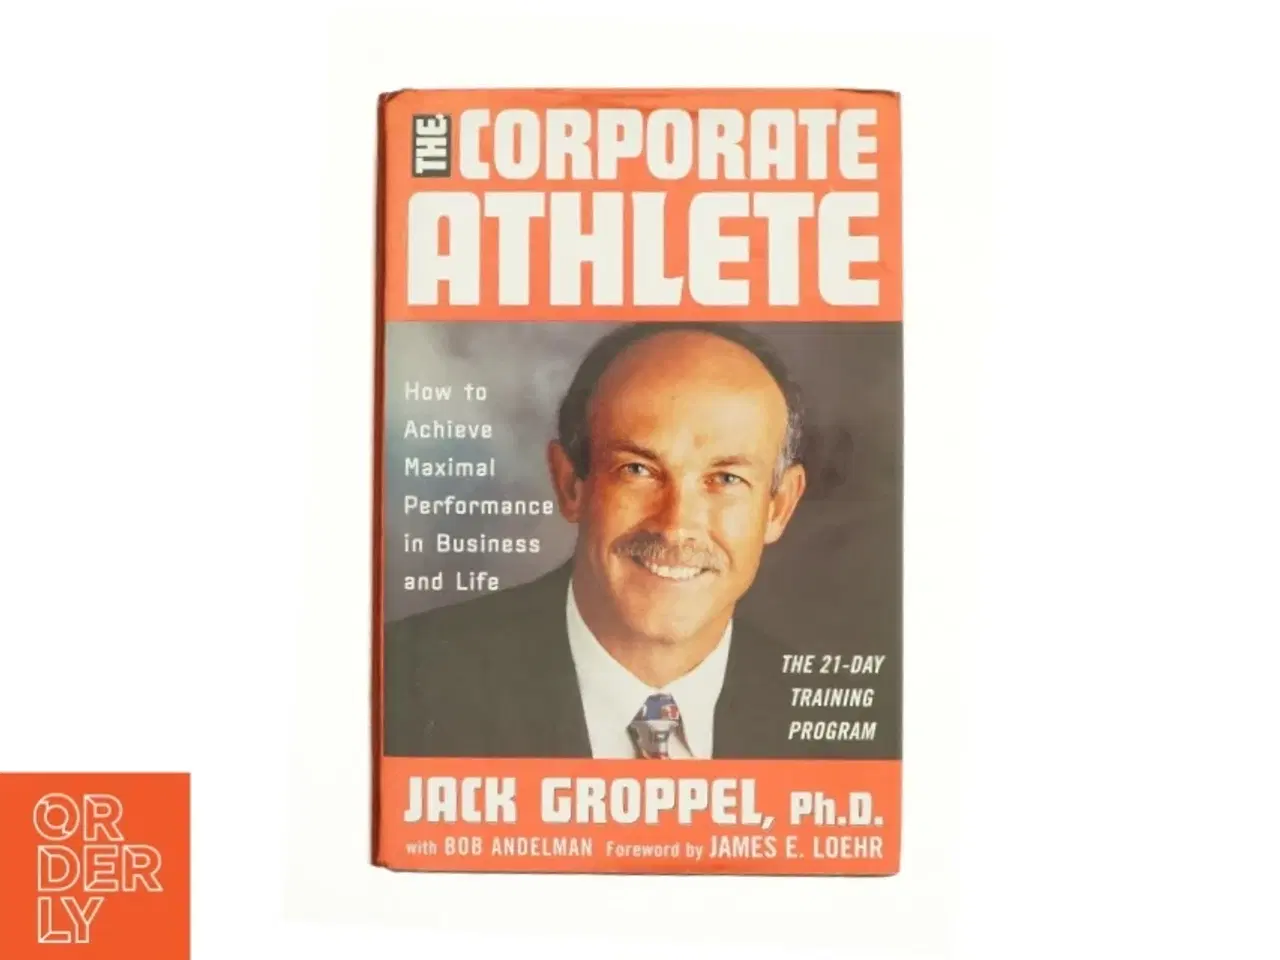 Billede 1 - The Corporate Athlete How to Achieve Maximal Performance in Business and Life af Jack L. Groppel (Bog)